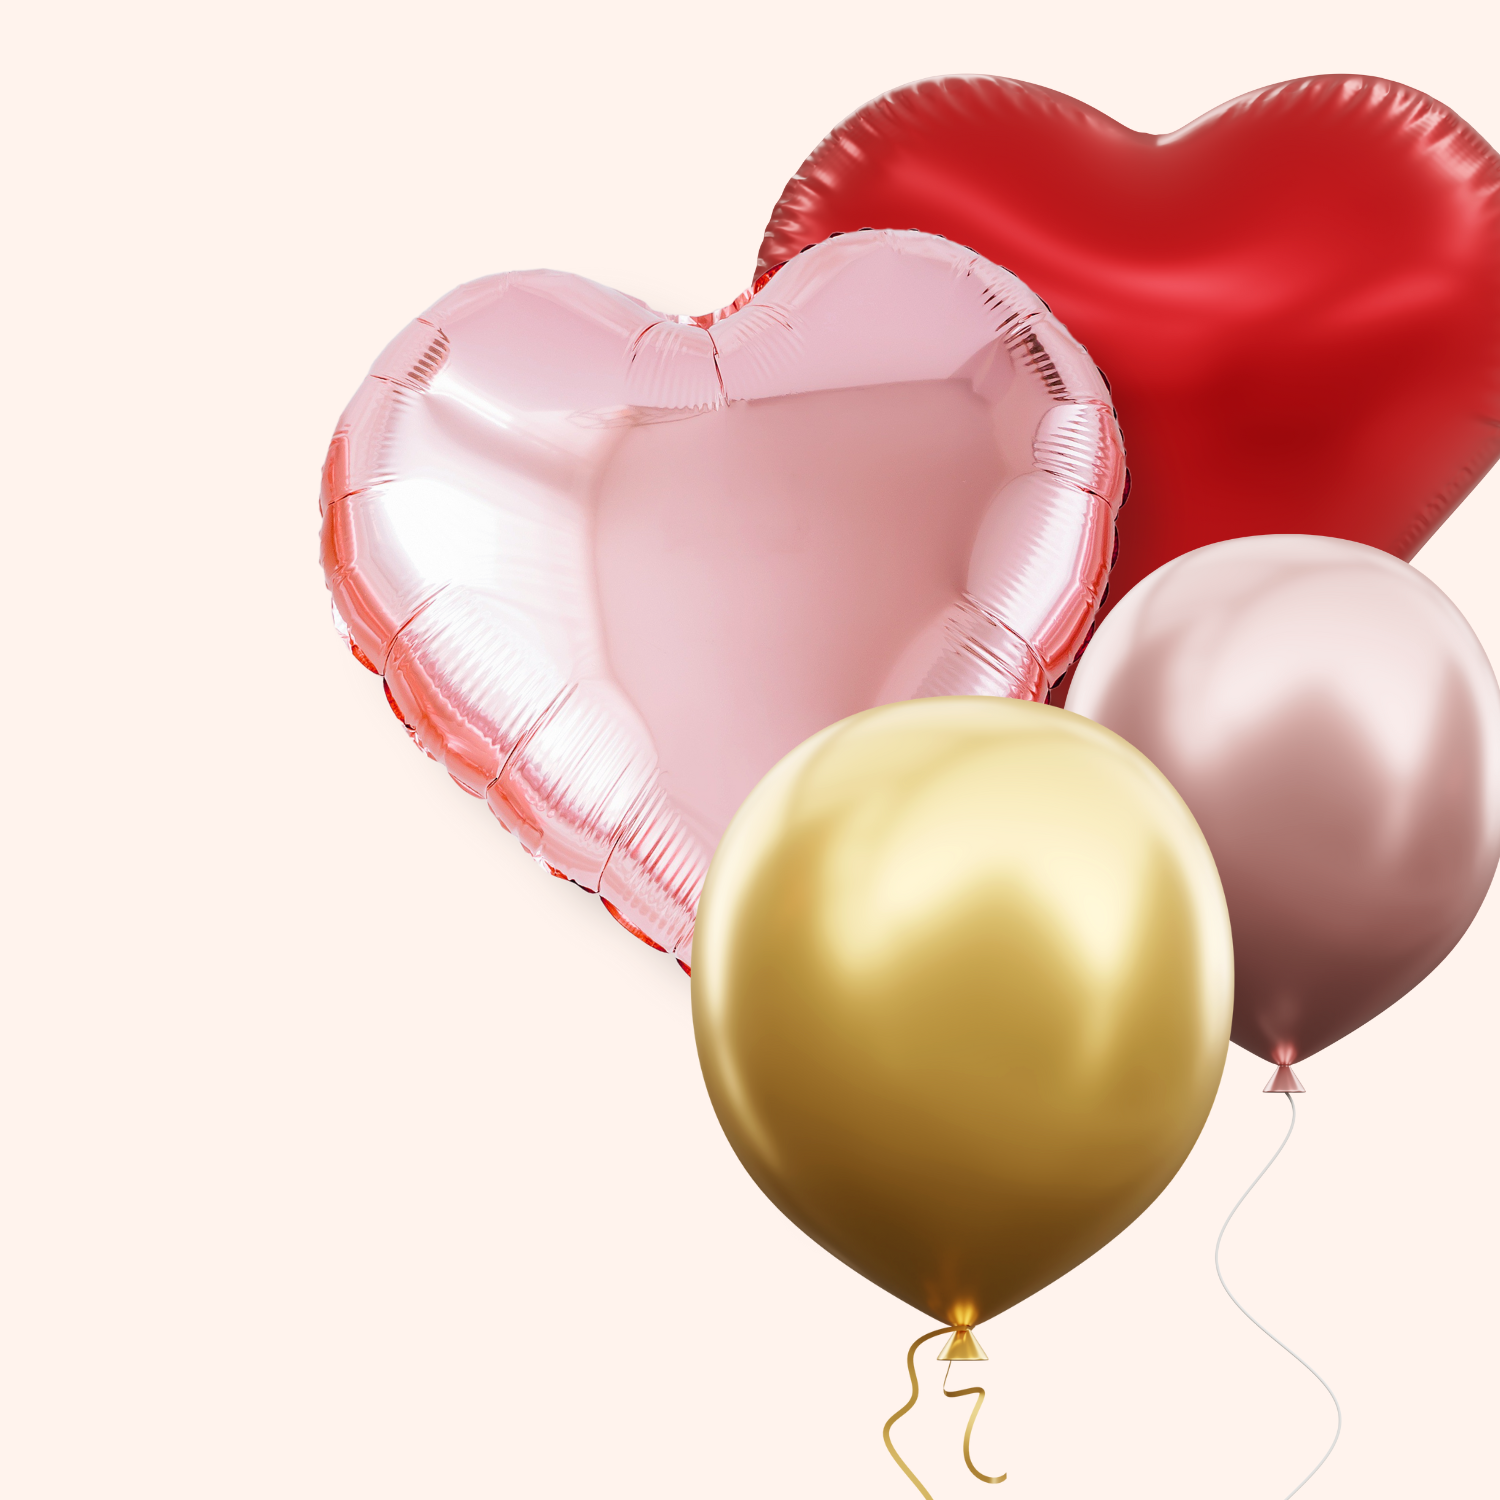 Balloons Gifts